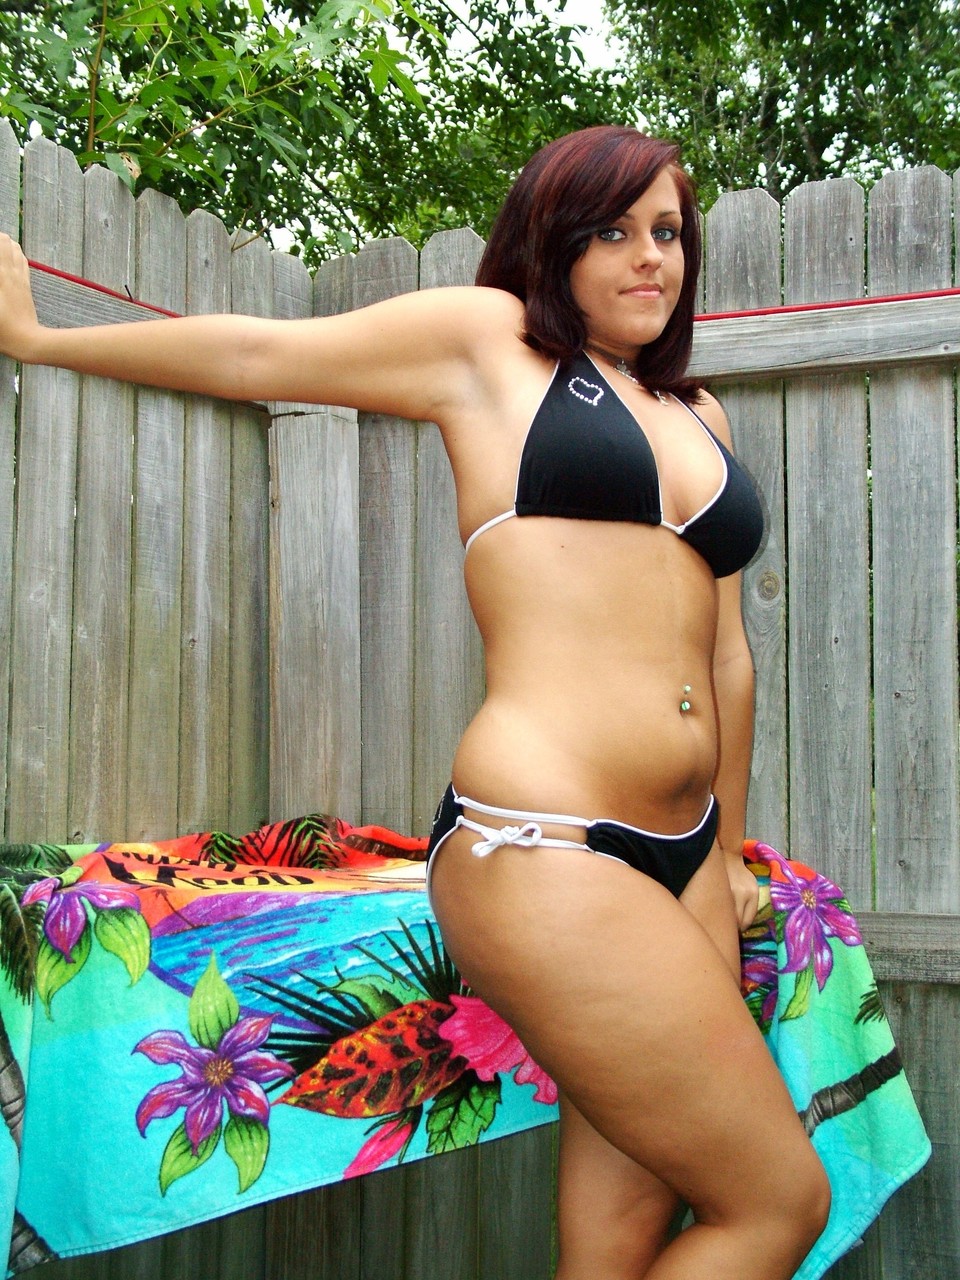 Chubby amateur teen Roxy displays her huge juggs and poses in the back yard foto porno #425617654 | Teen Girl Photos Pics, Amateur, porno móvil